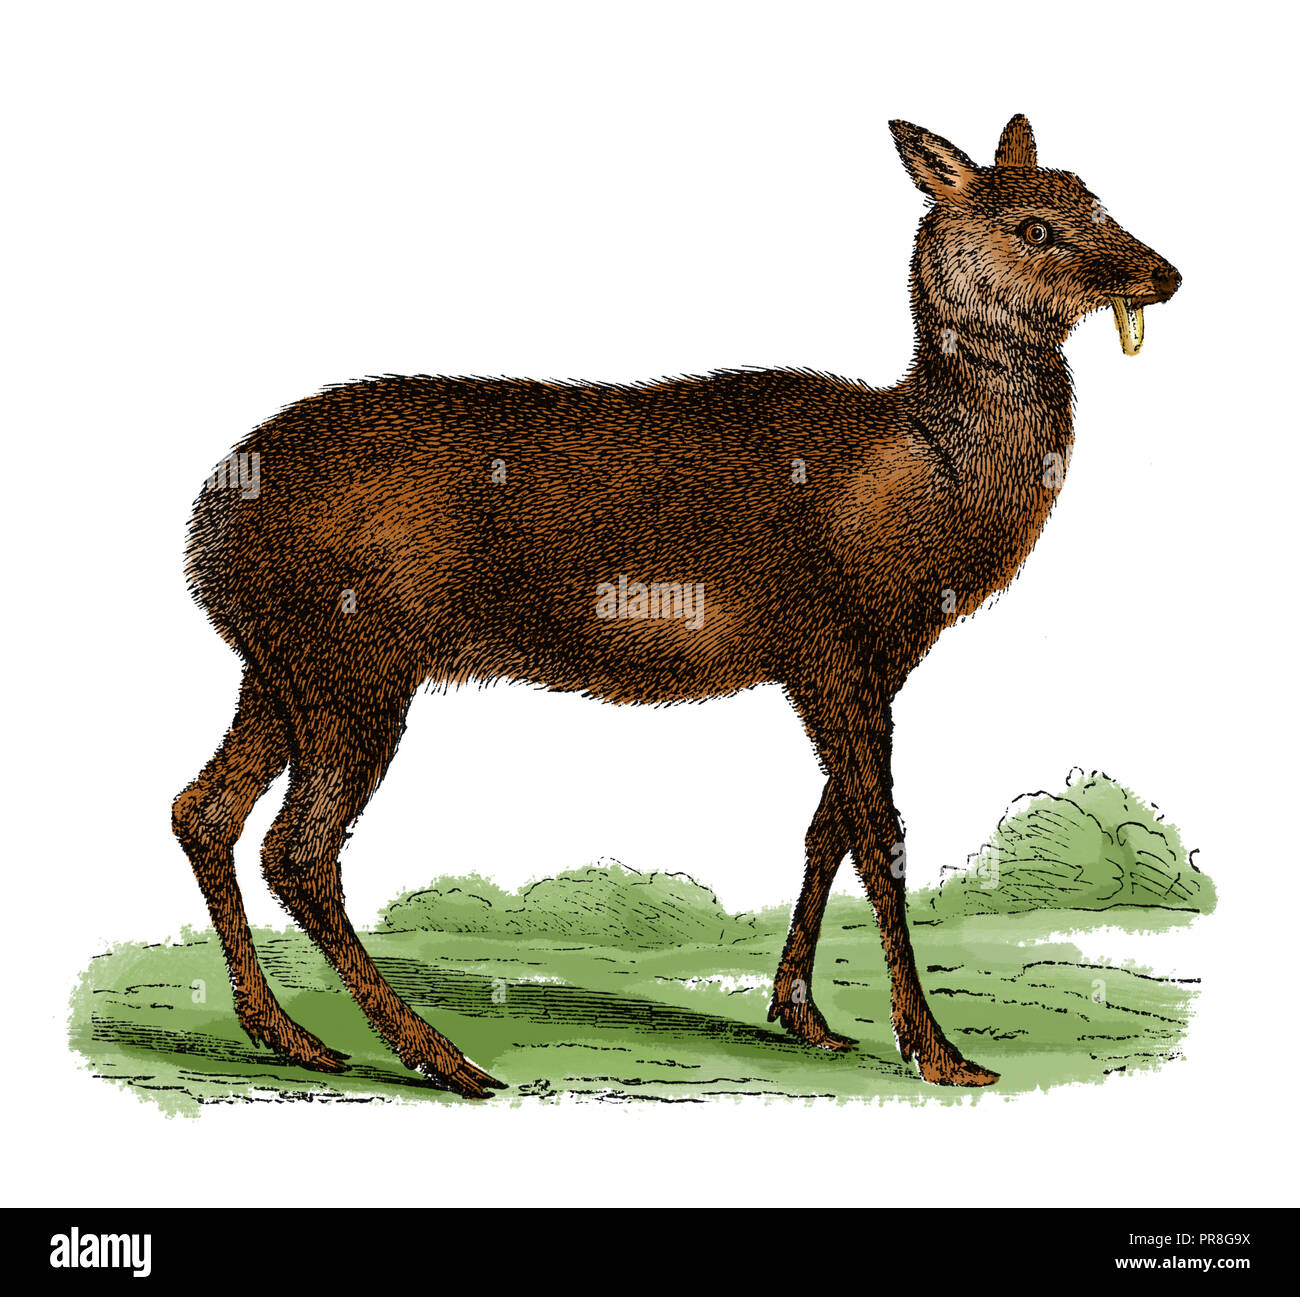 19th century illustration of a Musk deer - live mainly in forested and alpine scrub habitats in the mountains of southern Asia, notably the Himalayas. Stock Photo